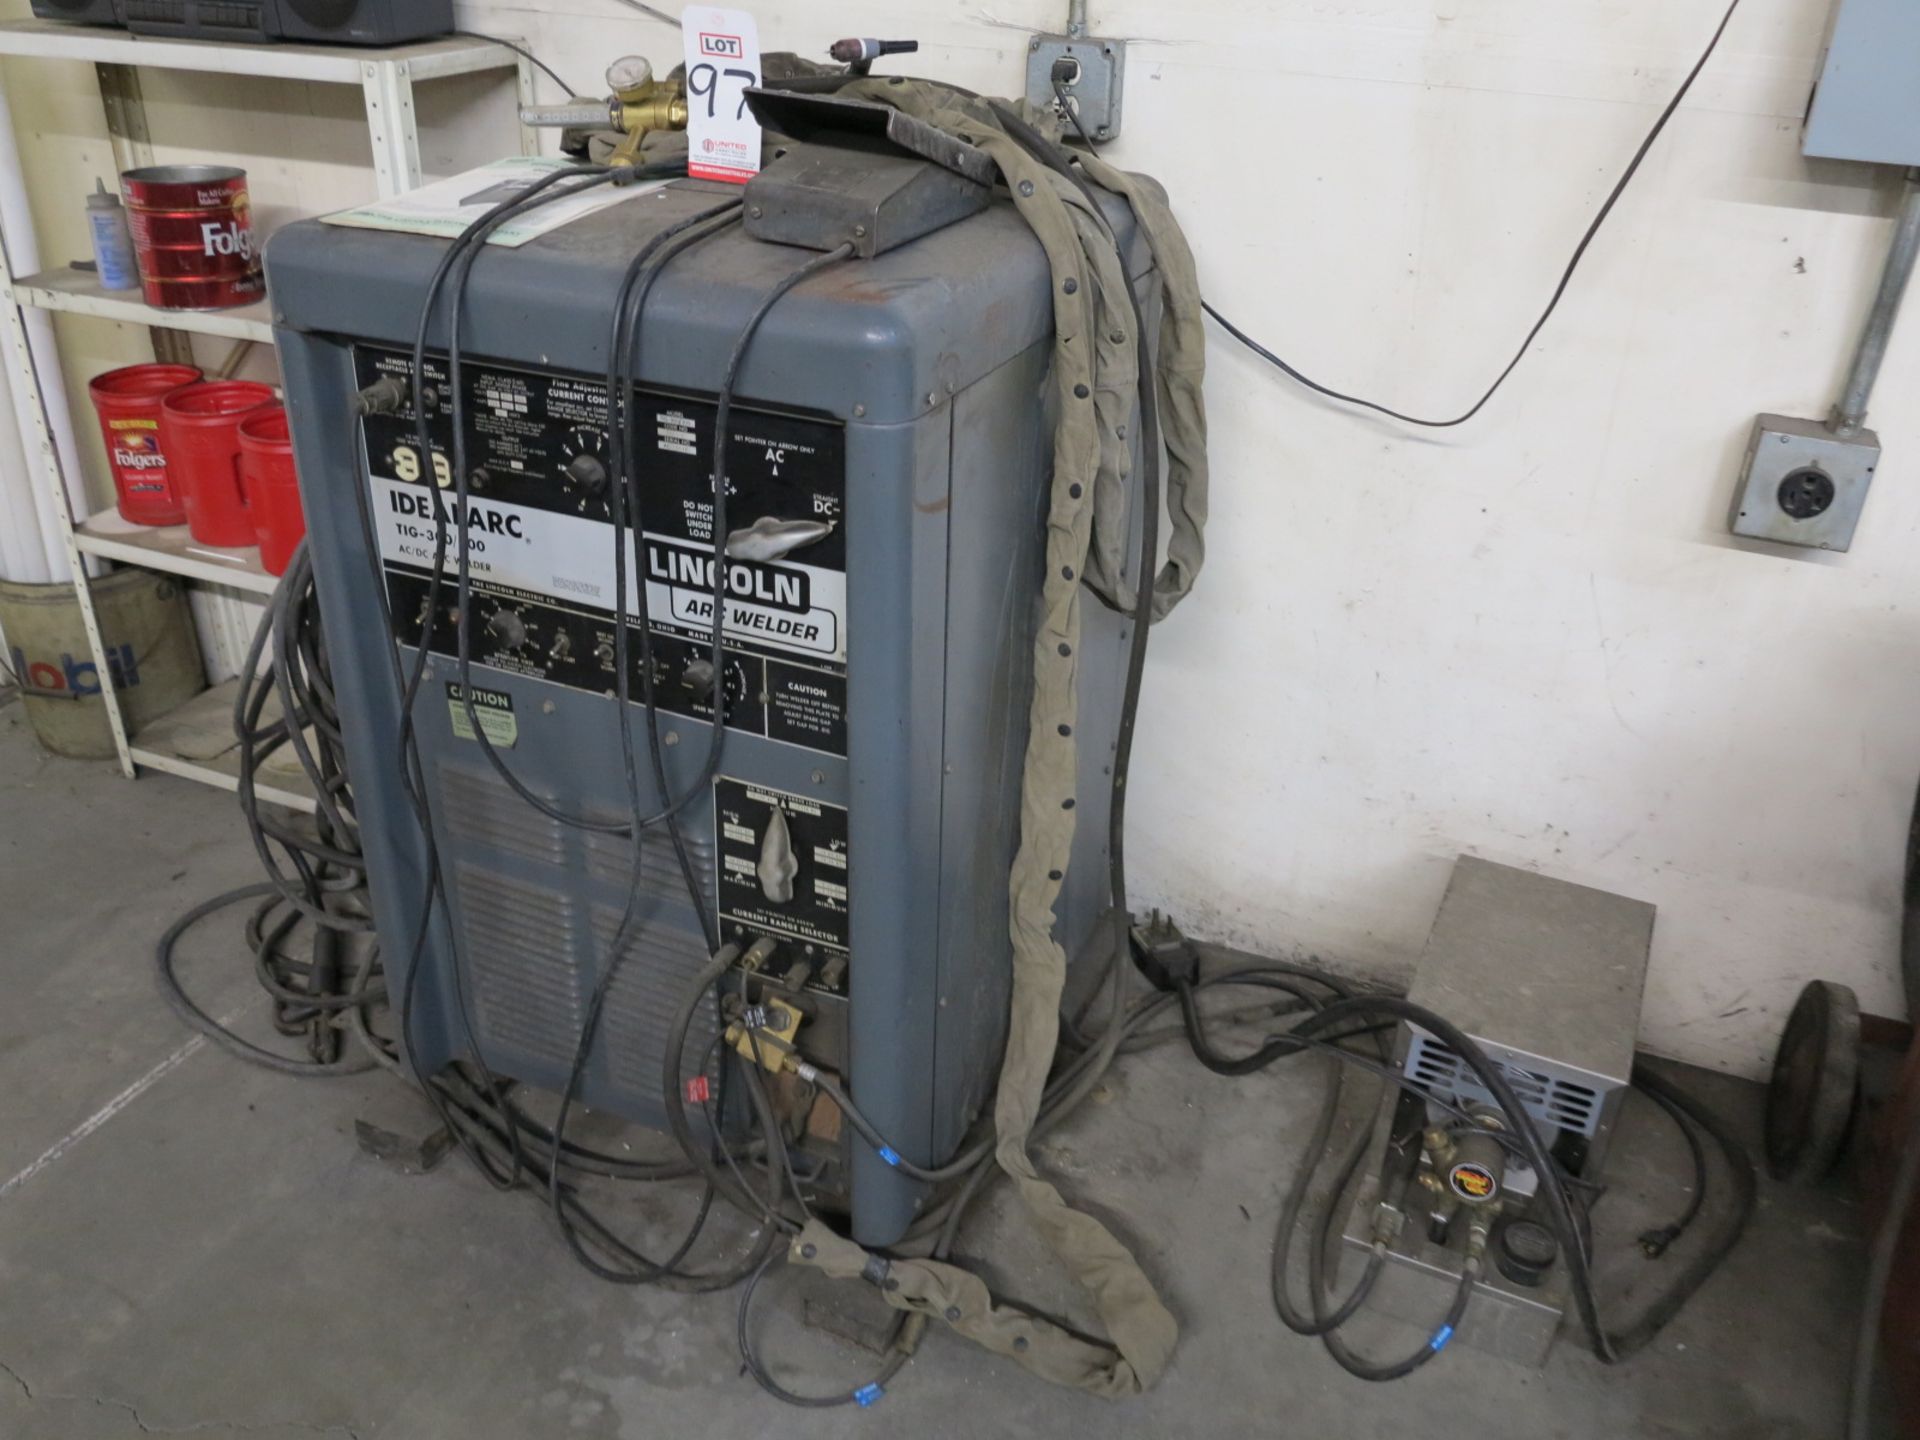 LINCOLN ARC WELDER, IDEALARC, TIG 300/300, S/N AC425465, W/ WELDTEC WATER CHILLER, HOSES AND GAUGE - Image 4 of 4